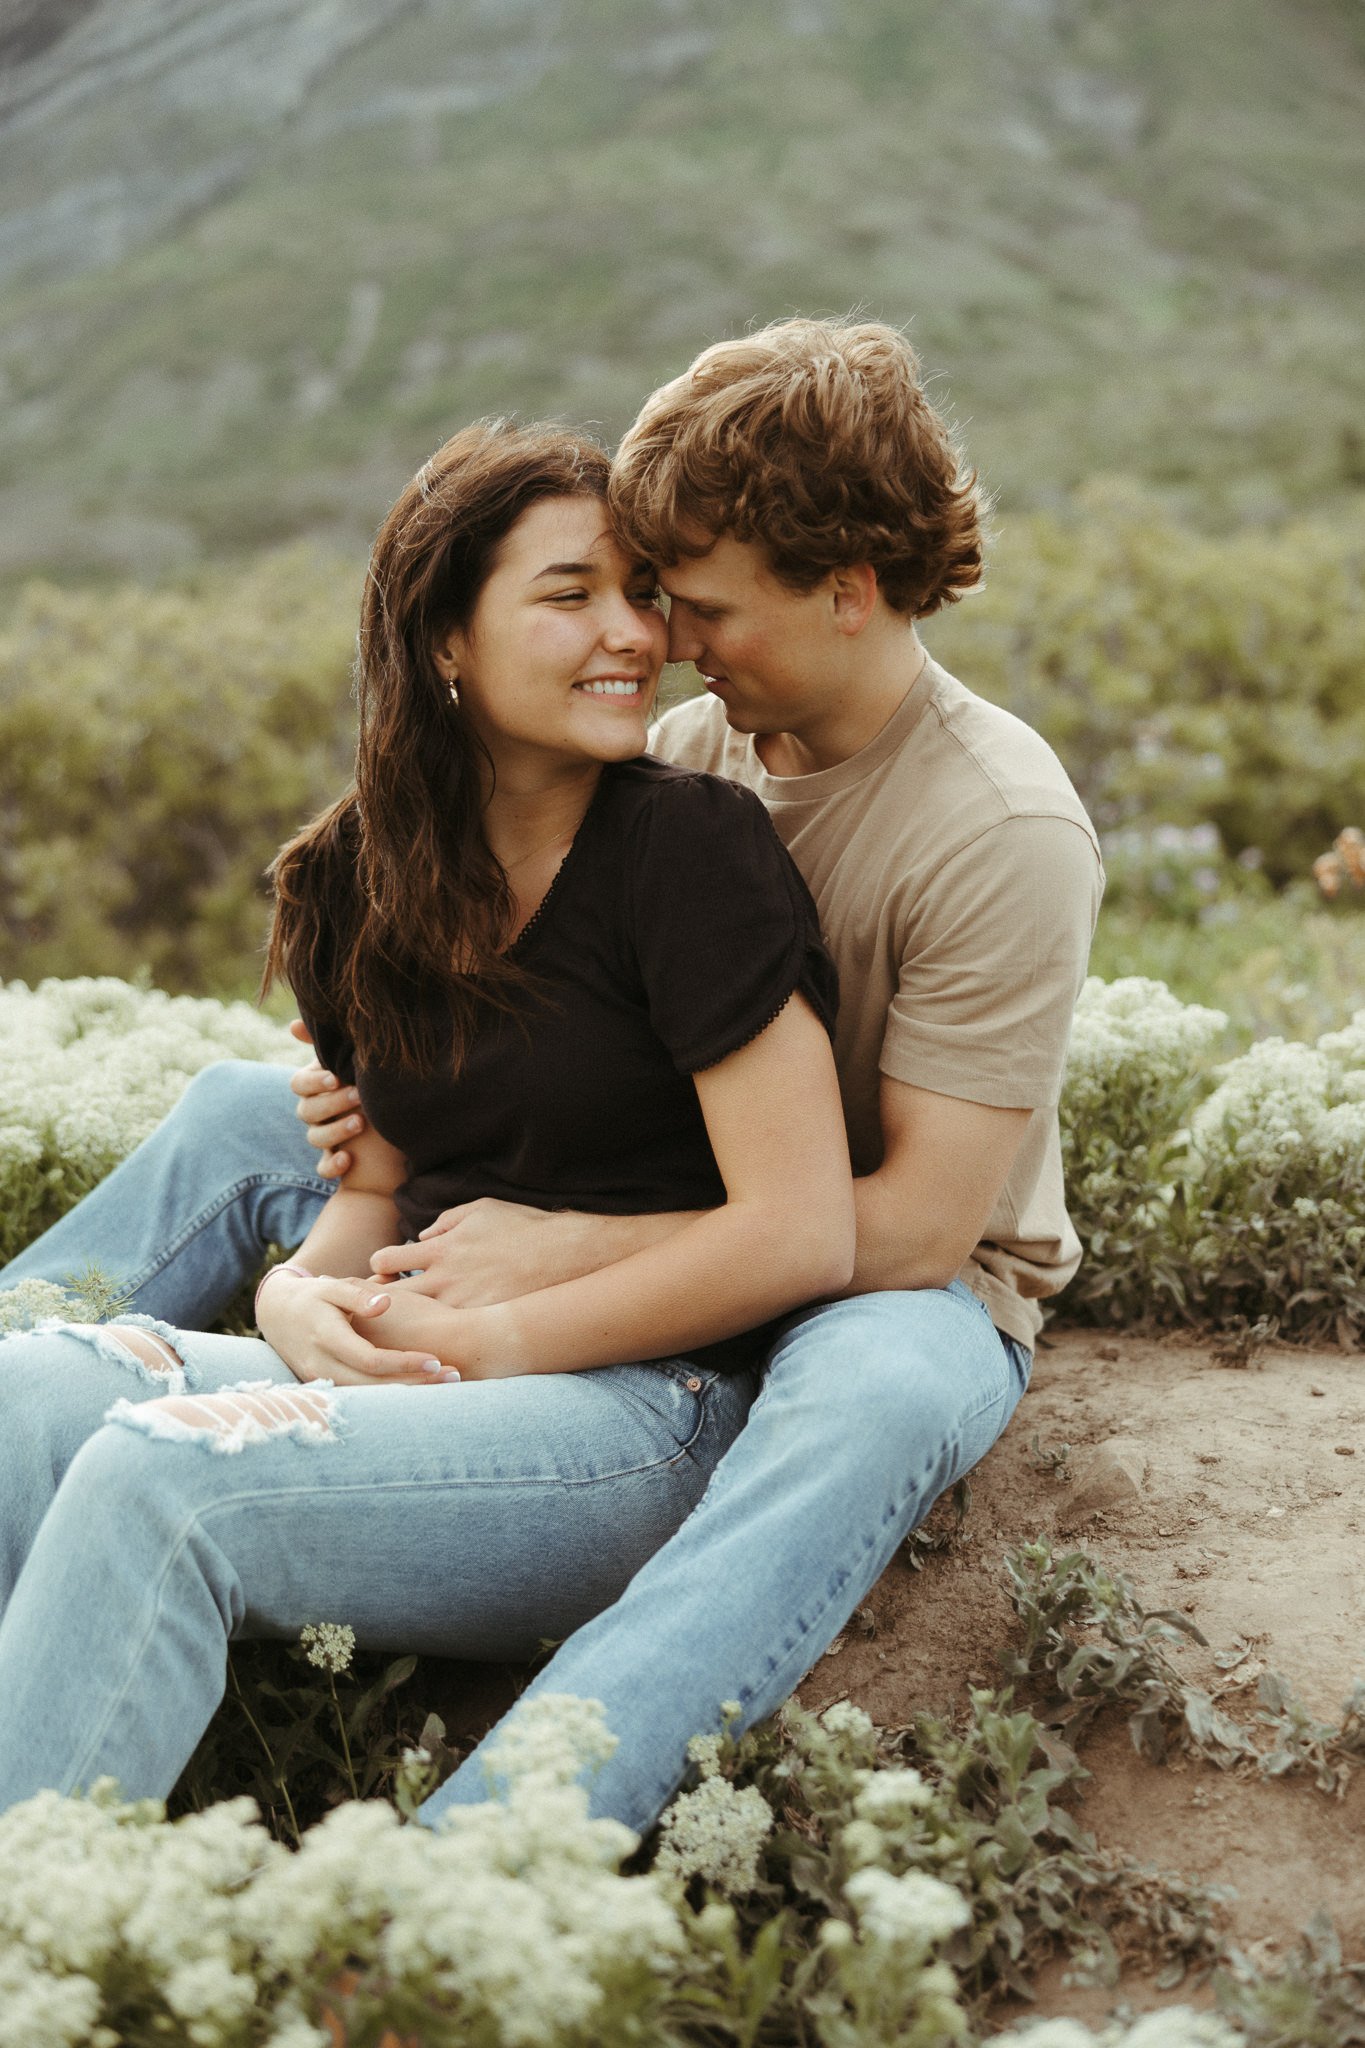 Spring-Provo-Canyon-Wildflowers-Engagement-Session-71